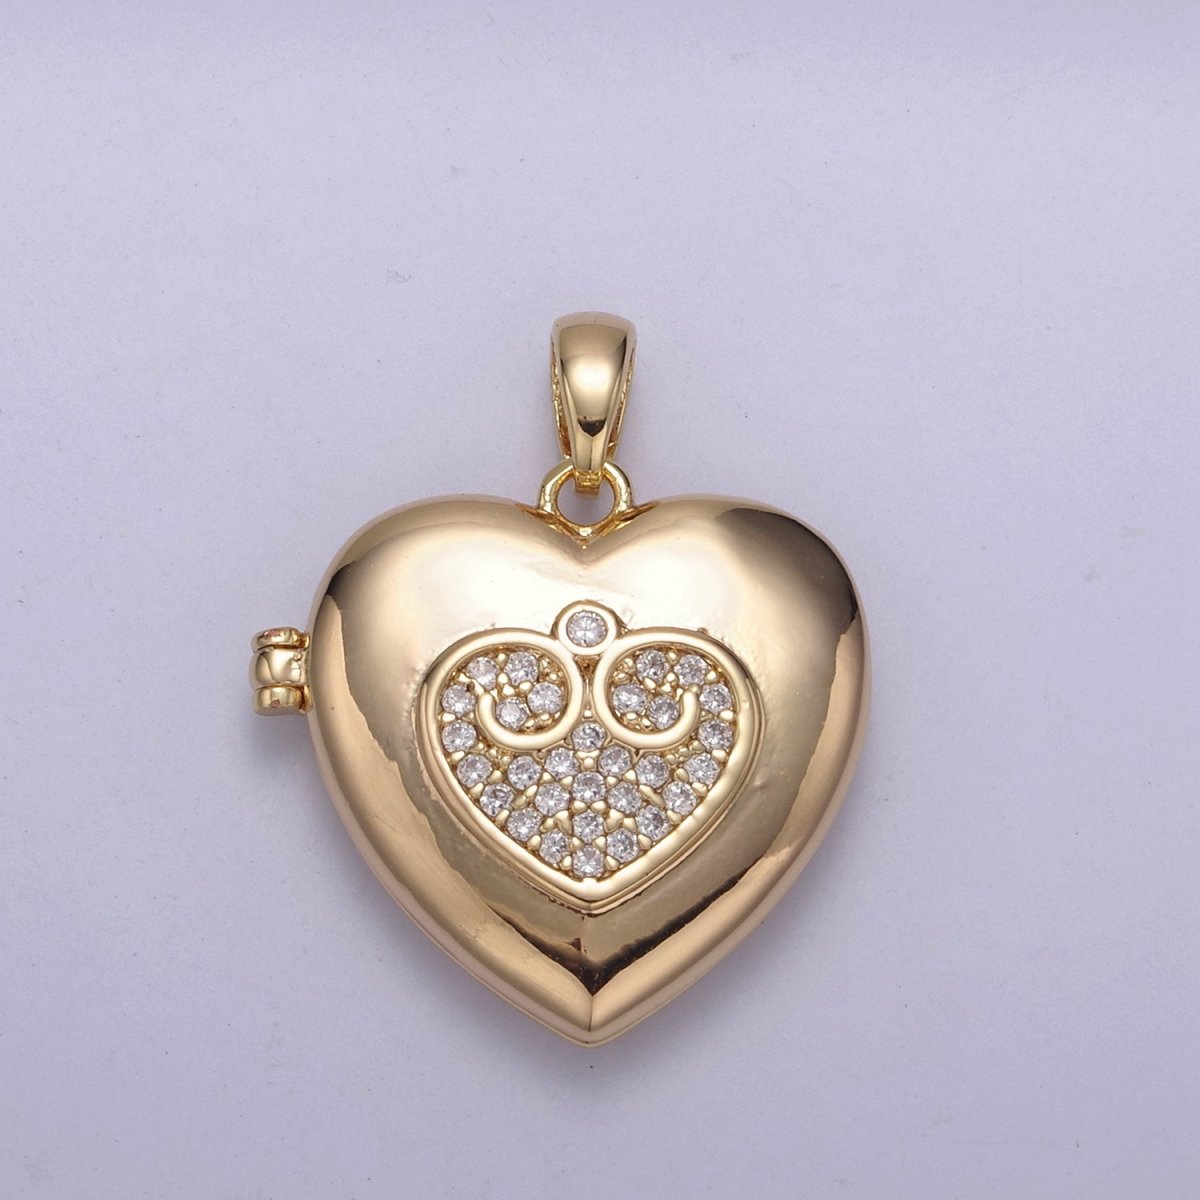 18K Gold Filled Heart Locket Pendant Photo Locket, Locket for Necklace, Micro Pave Cz Heart Locket, Gift for Her H-553 H-556 - DLUXCA